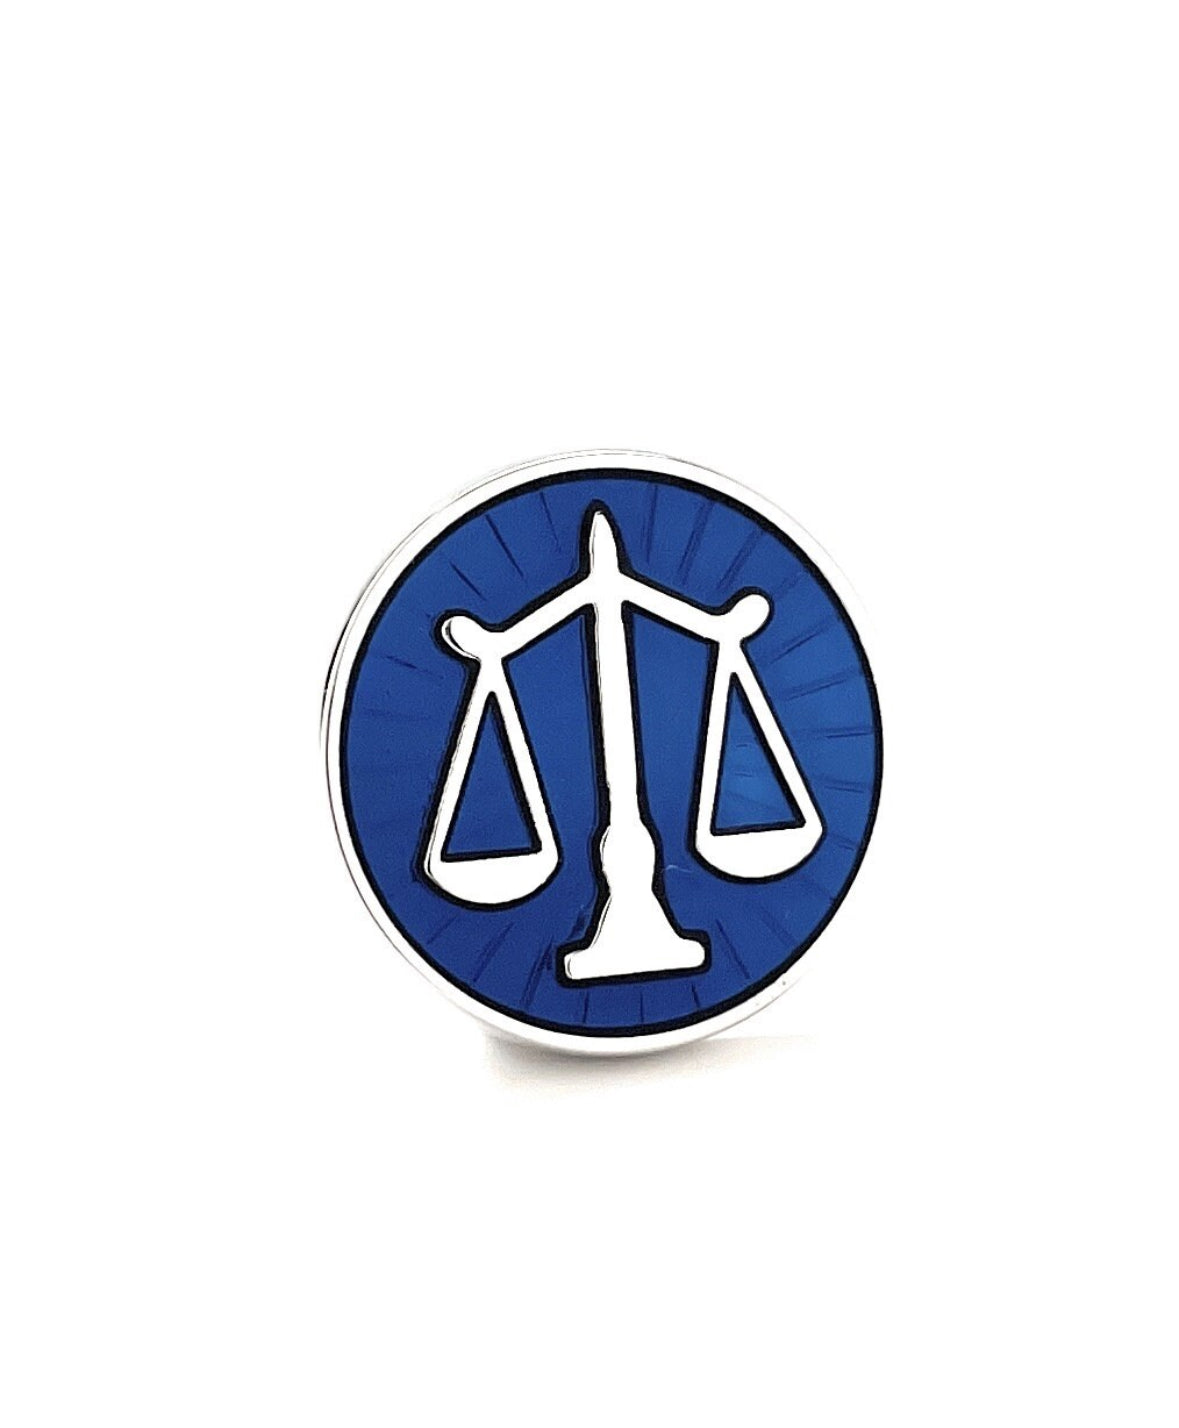 Scale of Justice Pin Lawyer Enamel Pin Court of Law Attorney Judge Tie Tack Law Student Blue Enamel Silver Trim Pro Pin